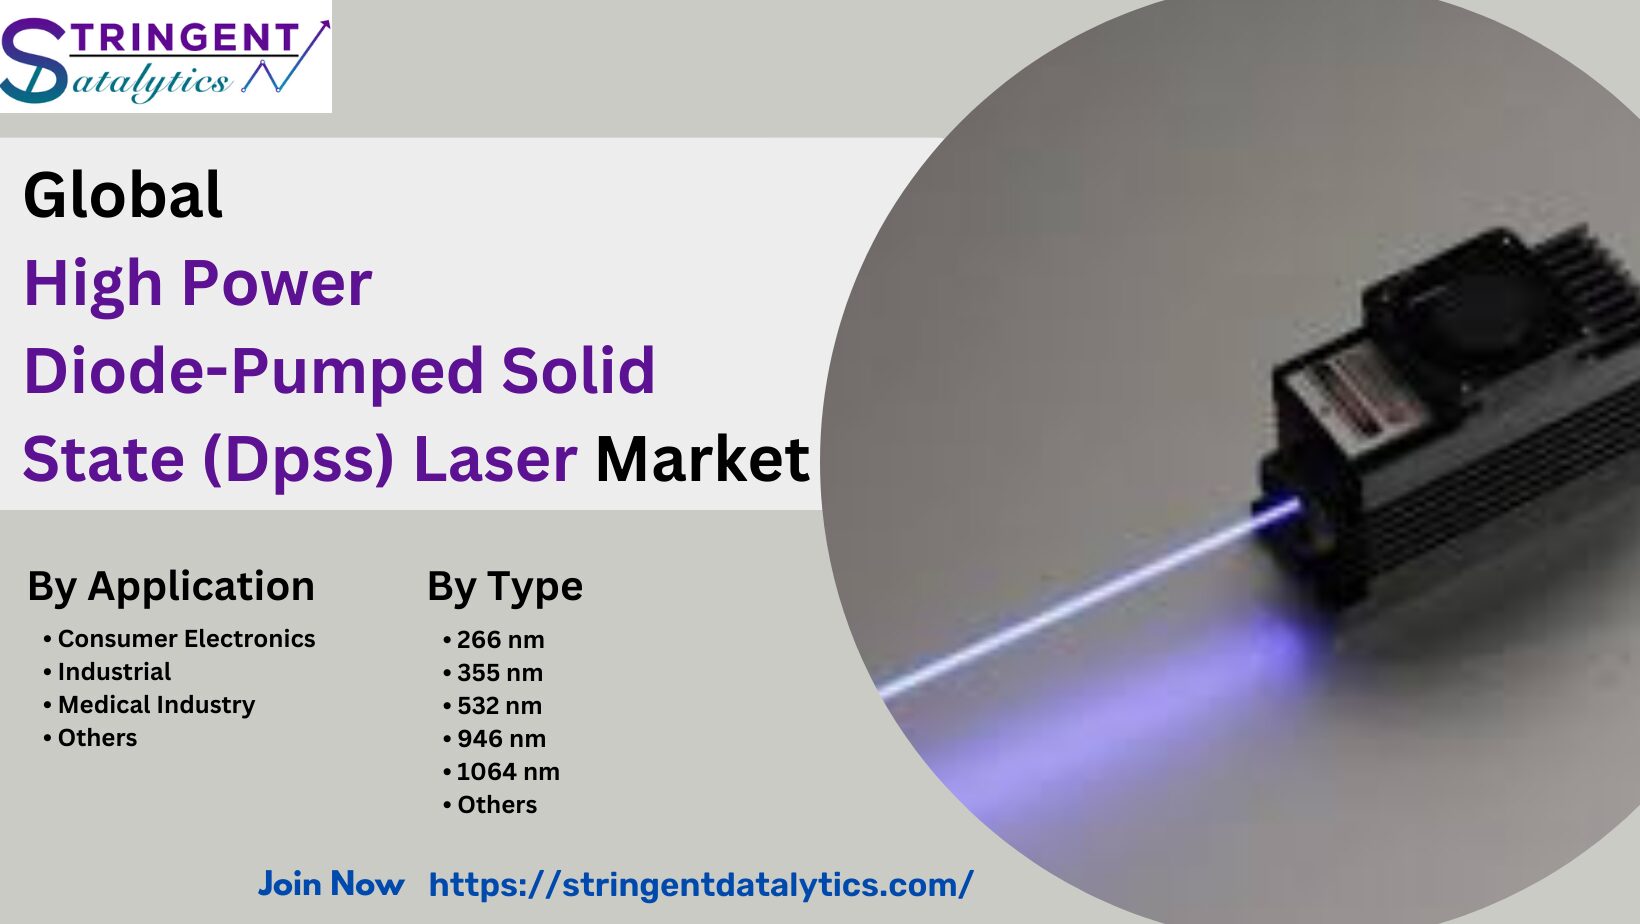 High Power Diode-Pumped Solid State (Dpss) Laser Market